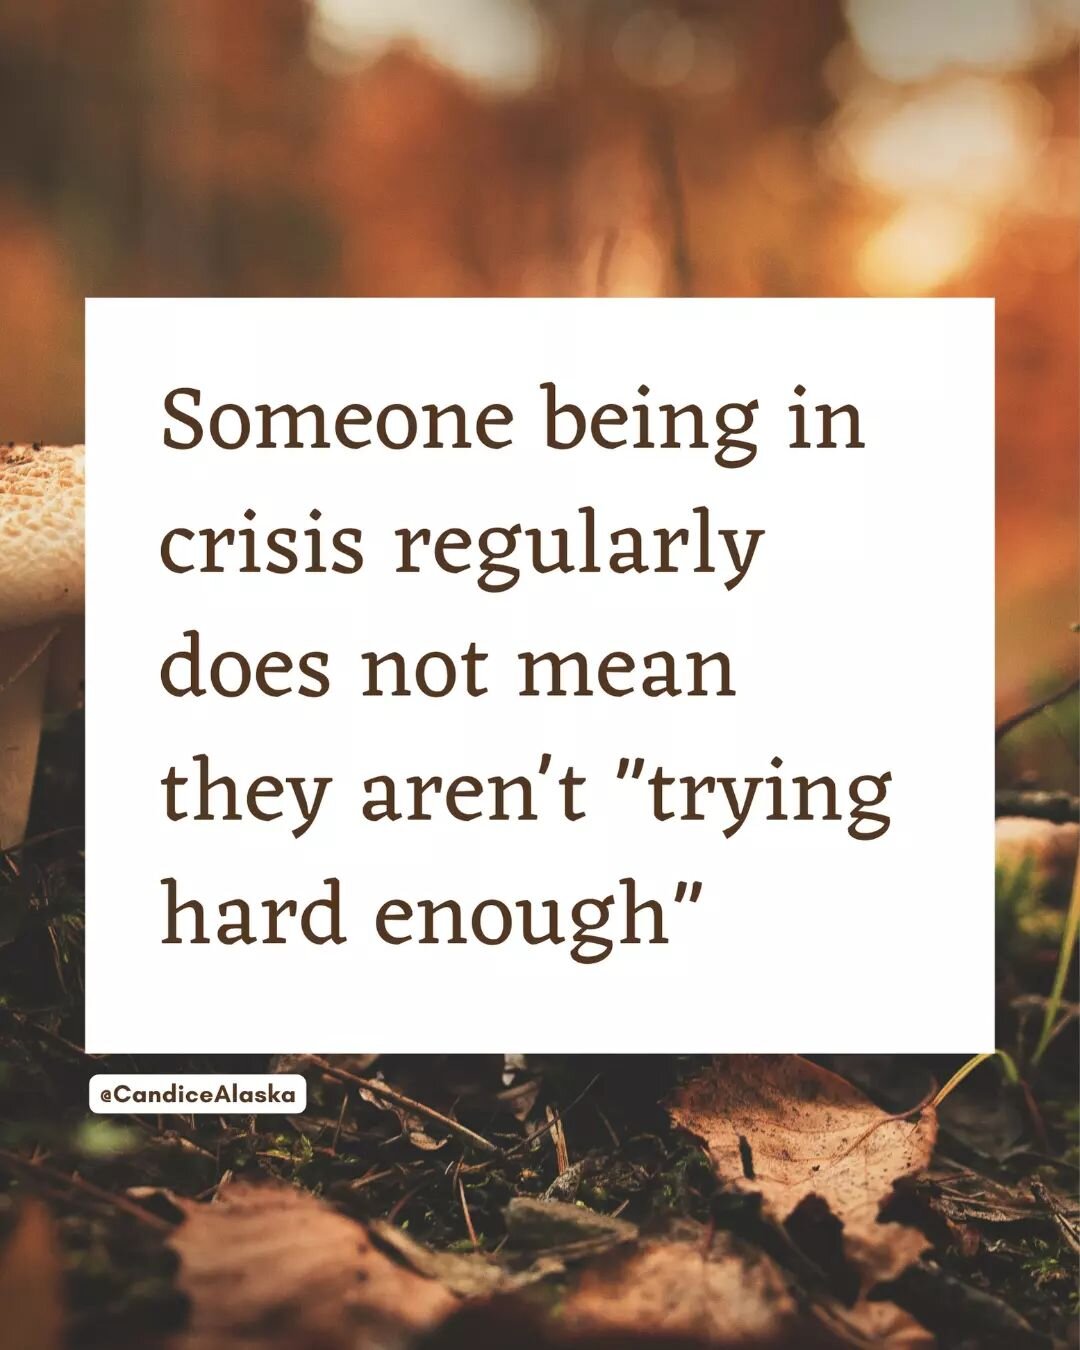 I saw a post recently by someone saying that they have a friend who goes into crisis everyday, which they interpreted as that person refusing to learn how to &quot;cope&quot;. They have another friend who only goes into crisis once every few months, 